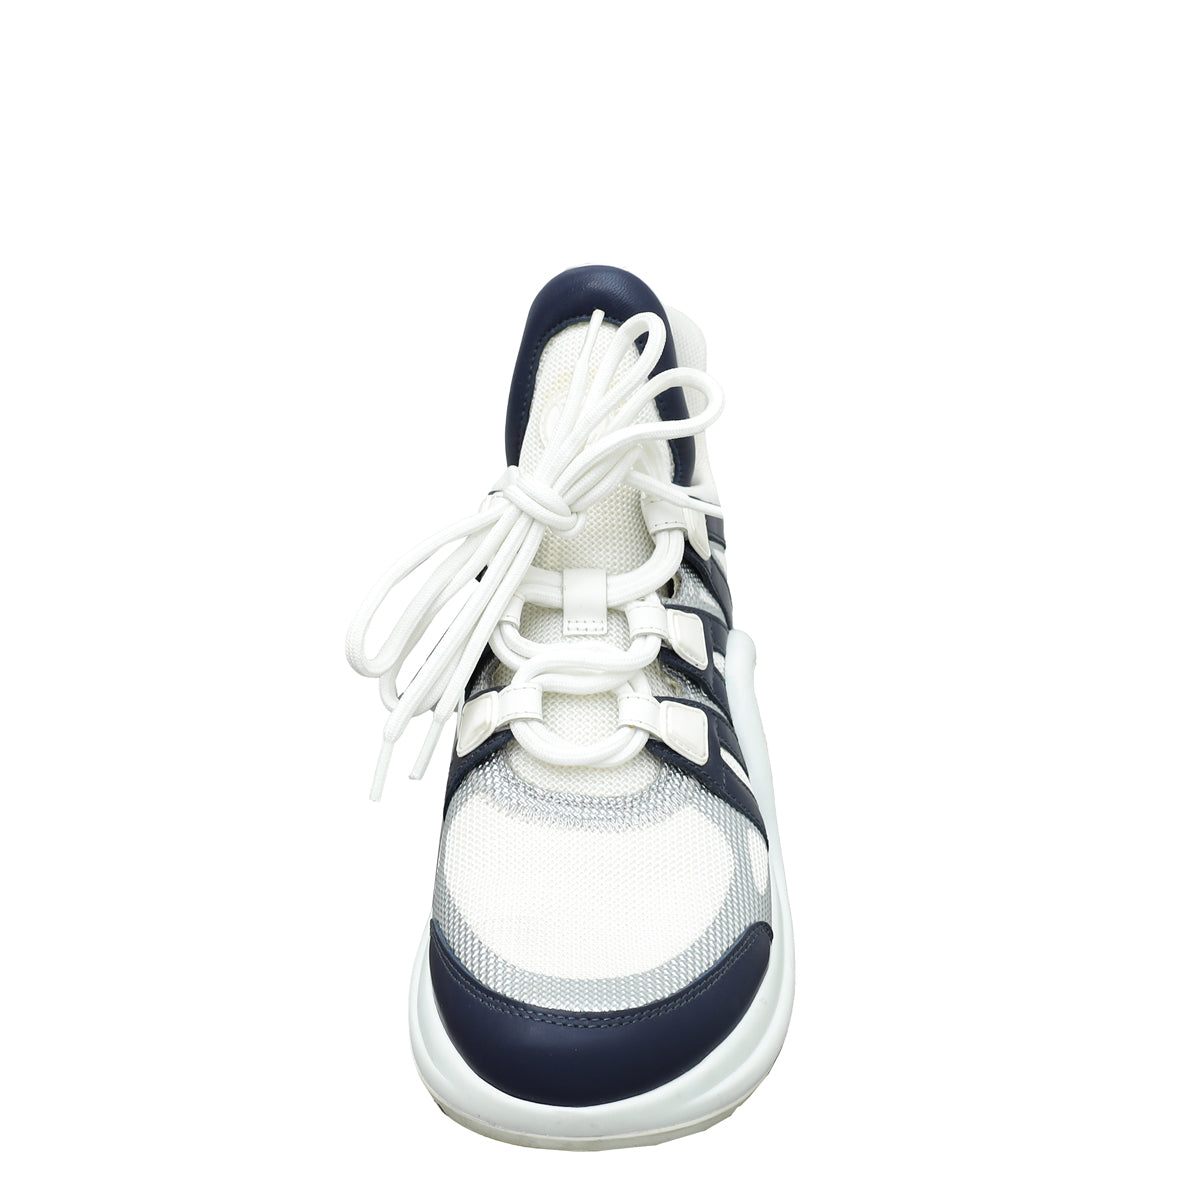 Louis Vuitton Archlight Sneakers Pink White Navy blue Light blue